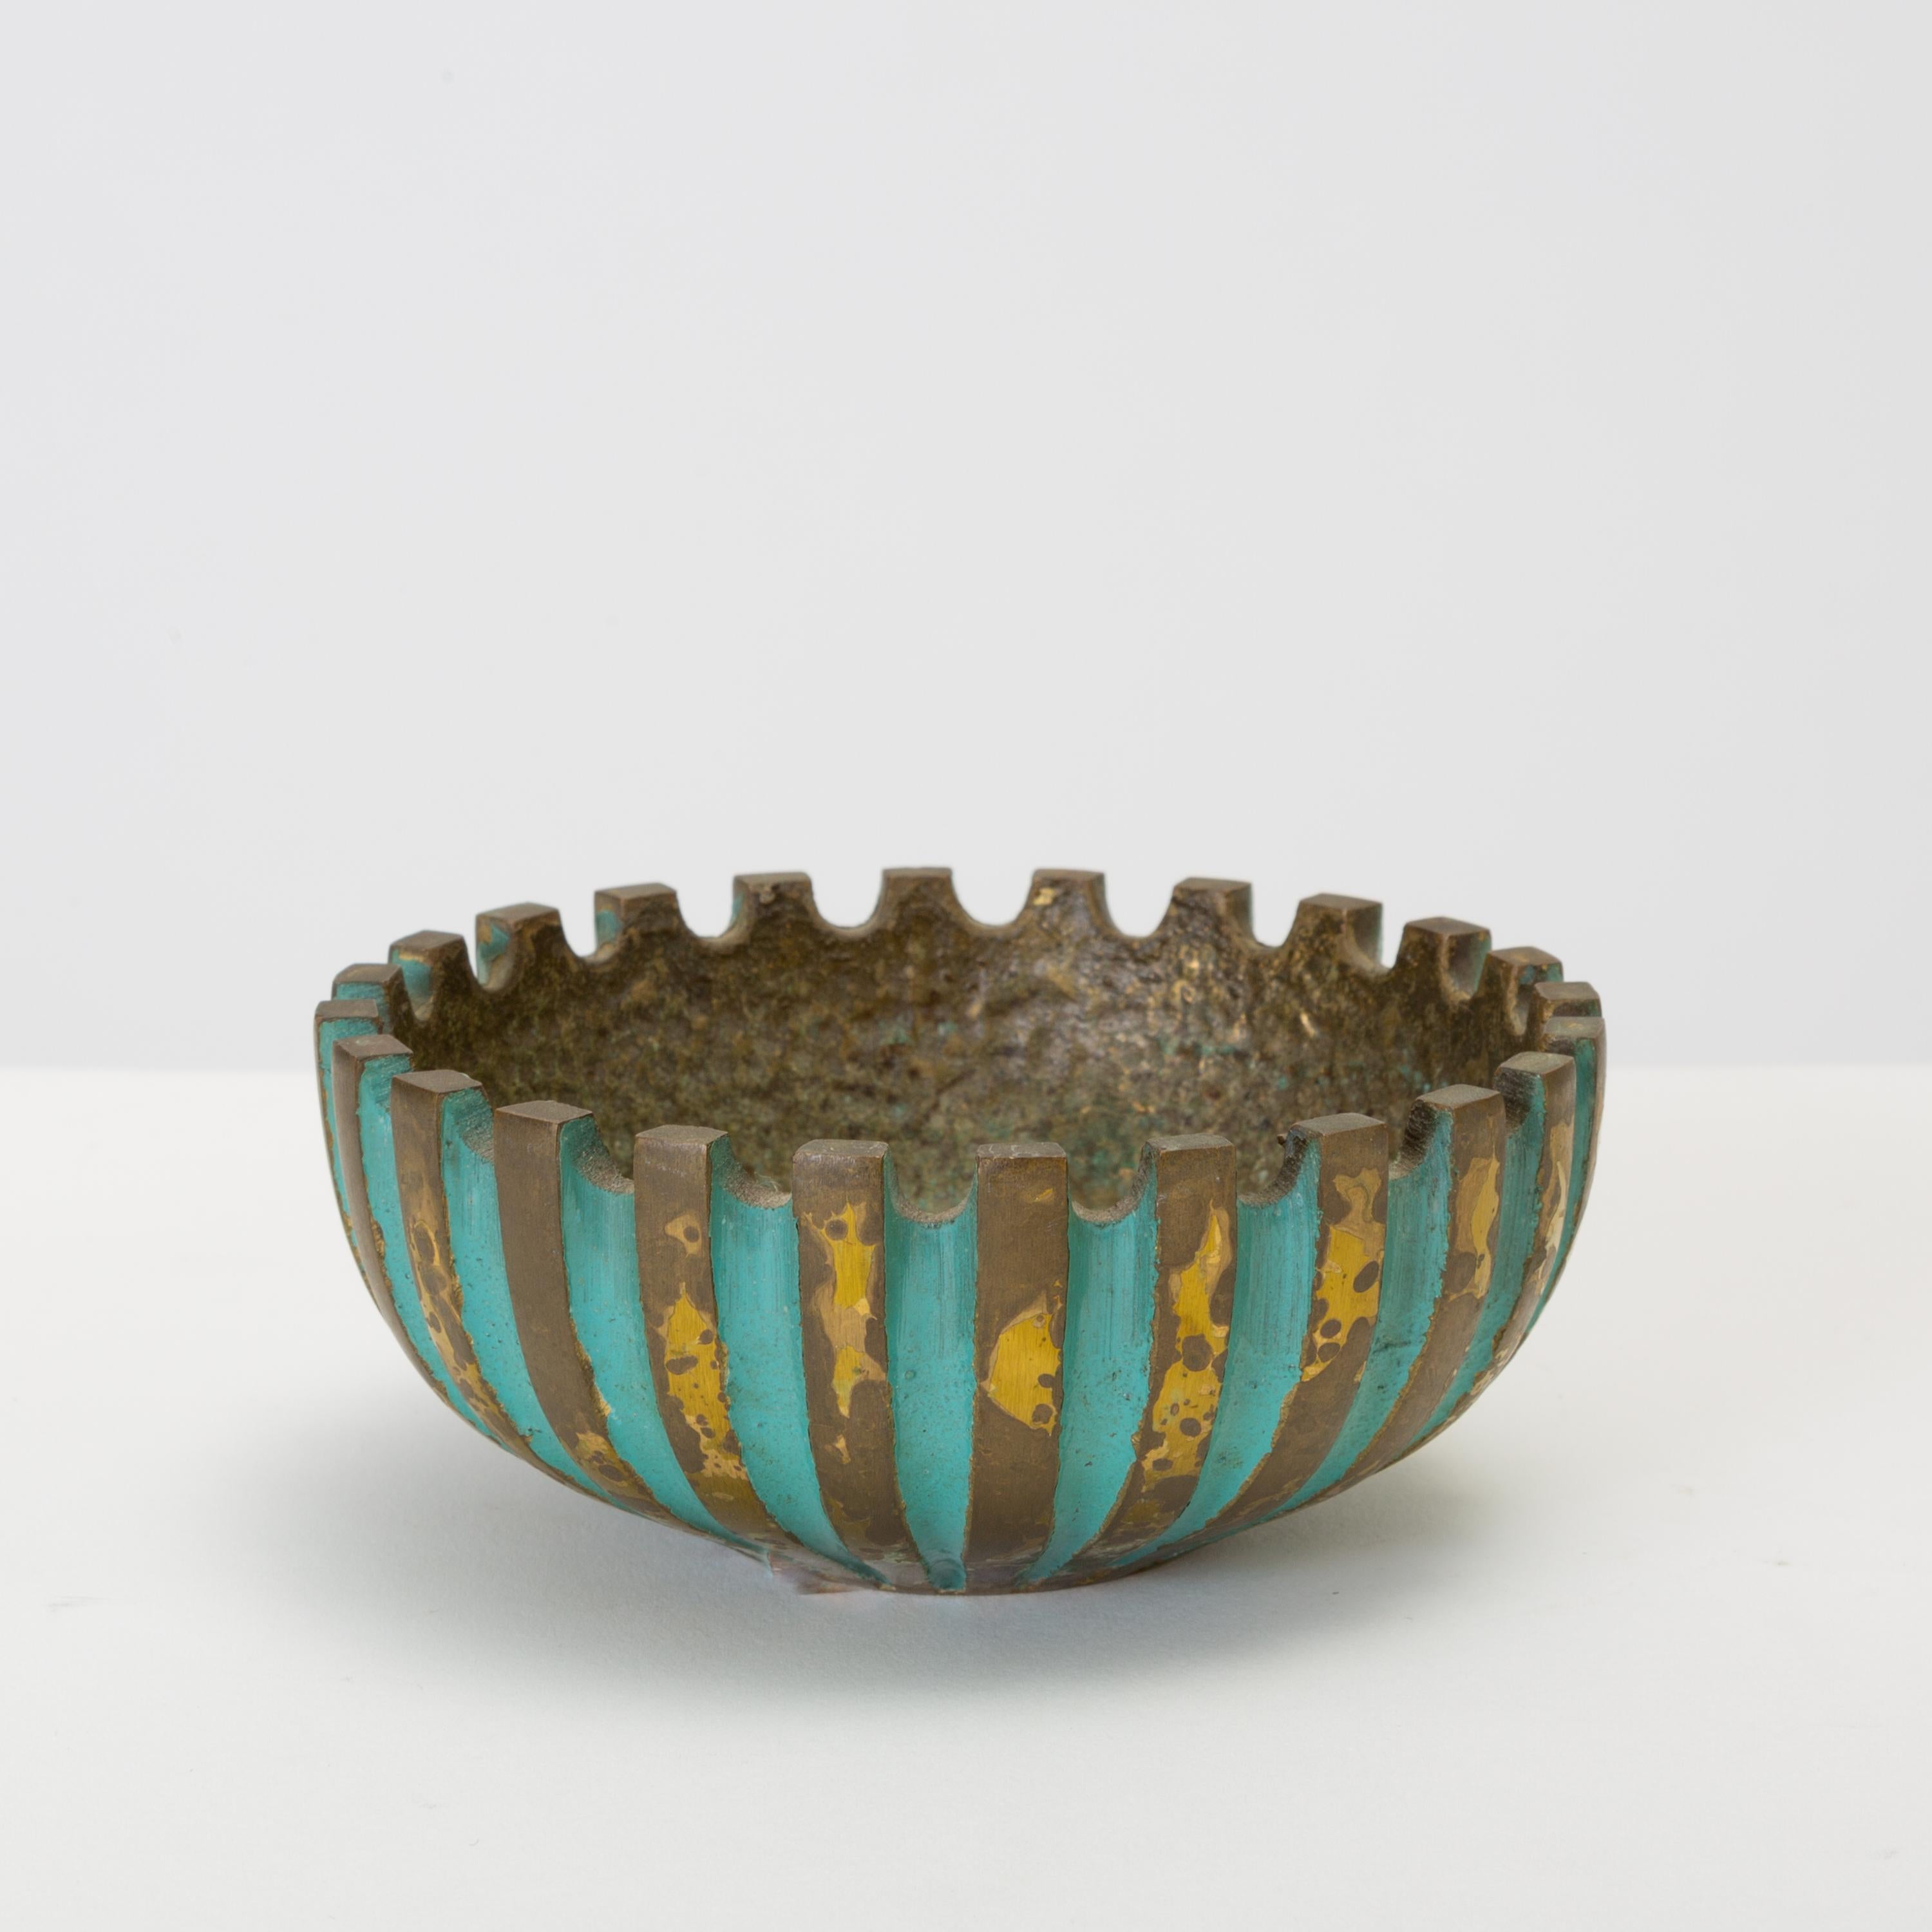 A heavy, cast bronze ashtray by Oppenheim of Israel. The bowl-shaped piece has a ridged construction with a scalloped edge and a hammered well. The concave portions of the fluting are finished with a verdigris patina that typifies Israeli decorative